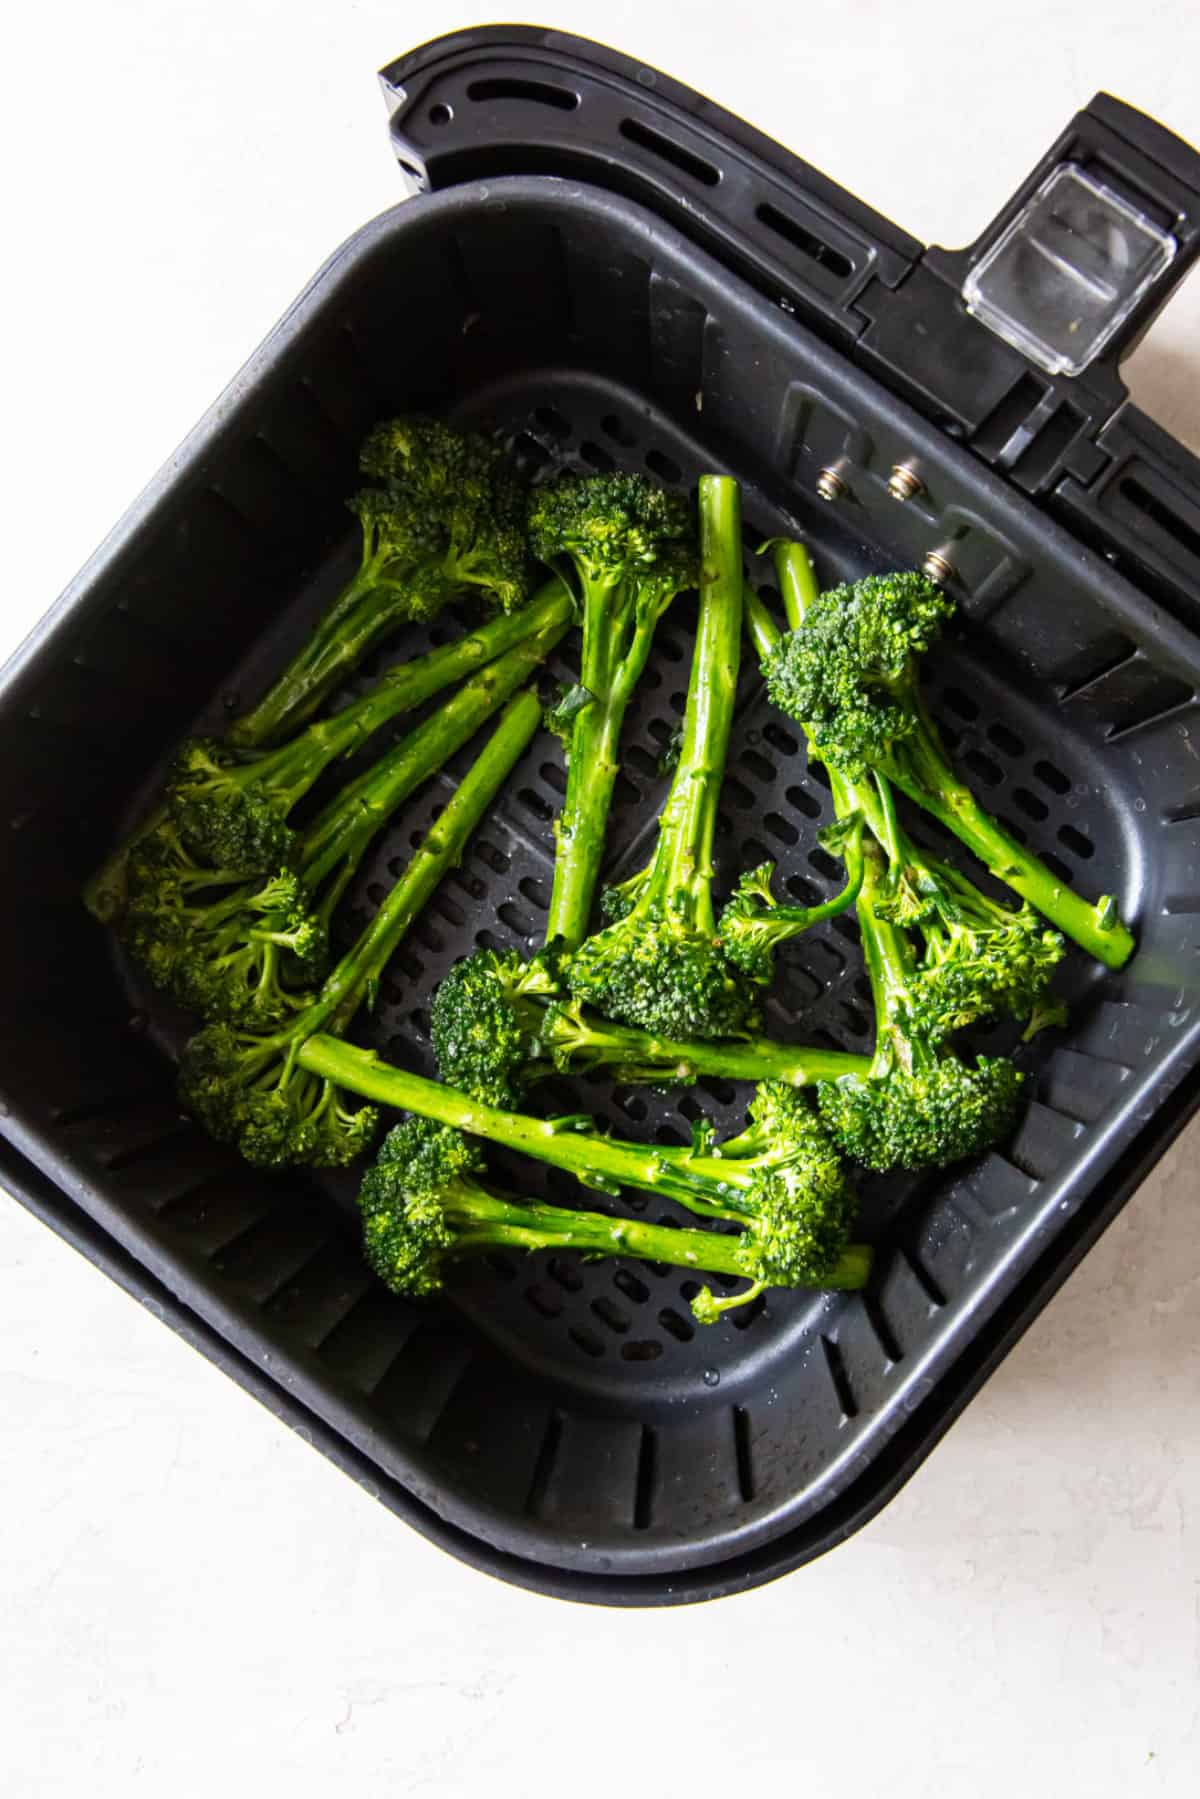 broccolini in the air fryer before cooking.